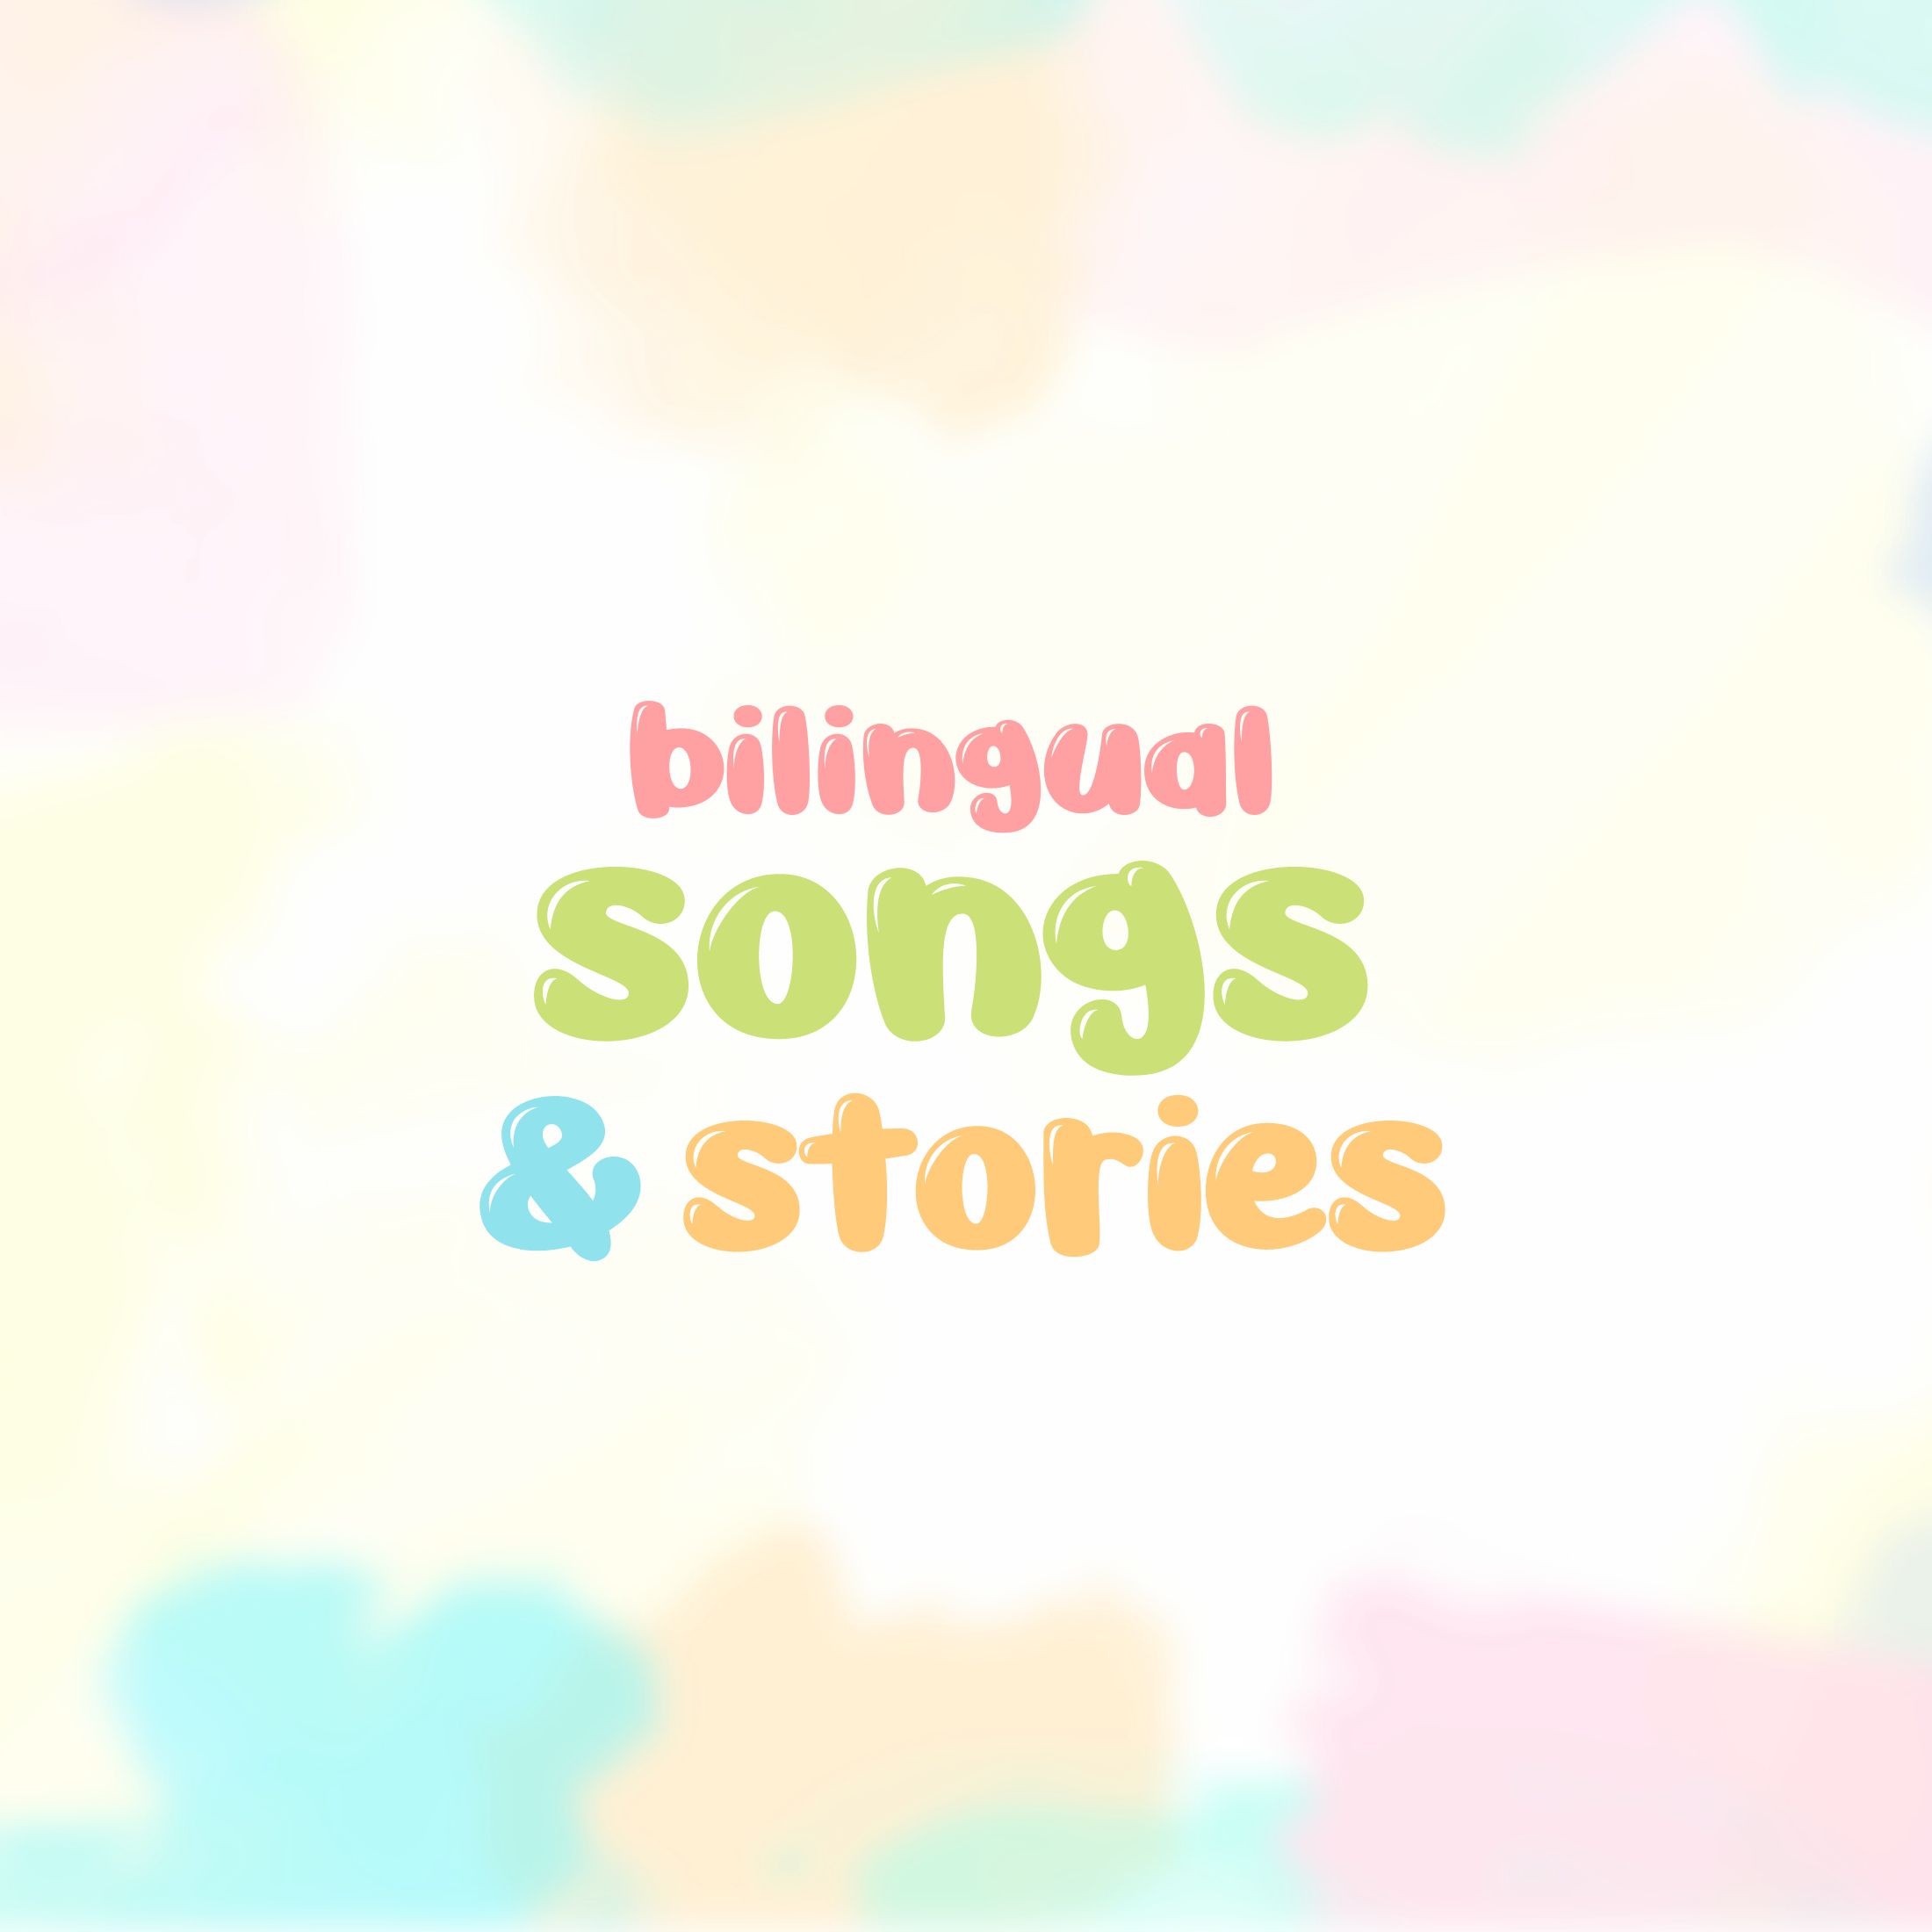 bilingual songs and stories text with balloons in the background